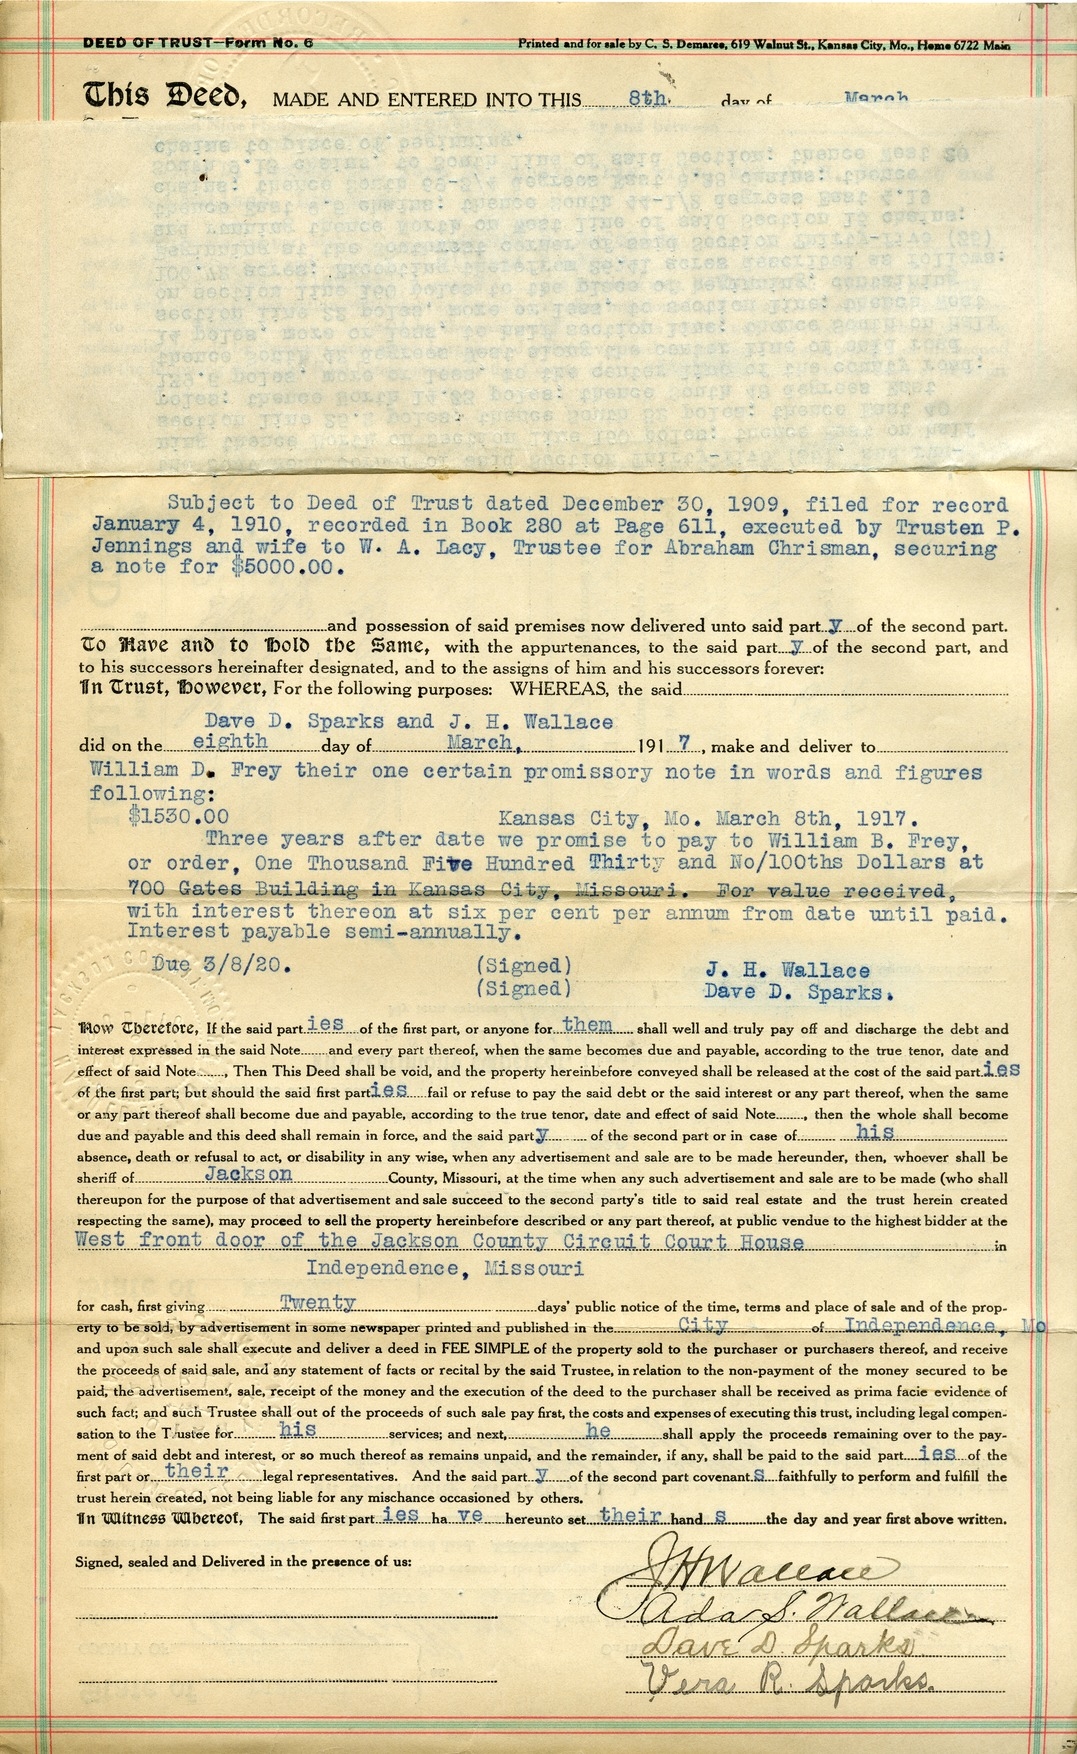 Deed of Trust from Dave D. Sparks et al. to Oscar D. McCollum for William B. Frey